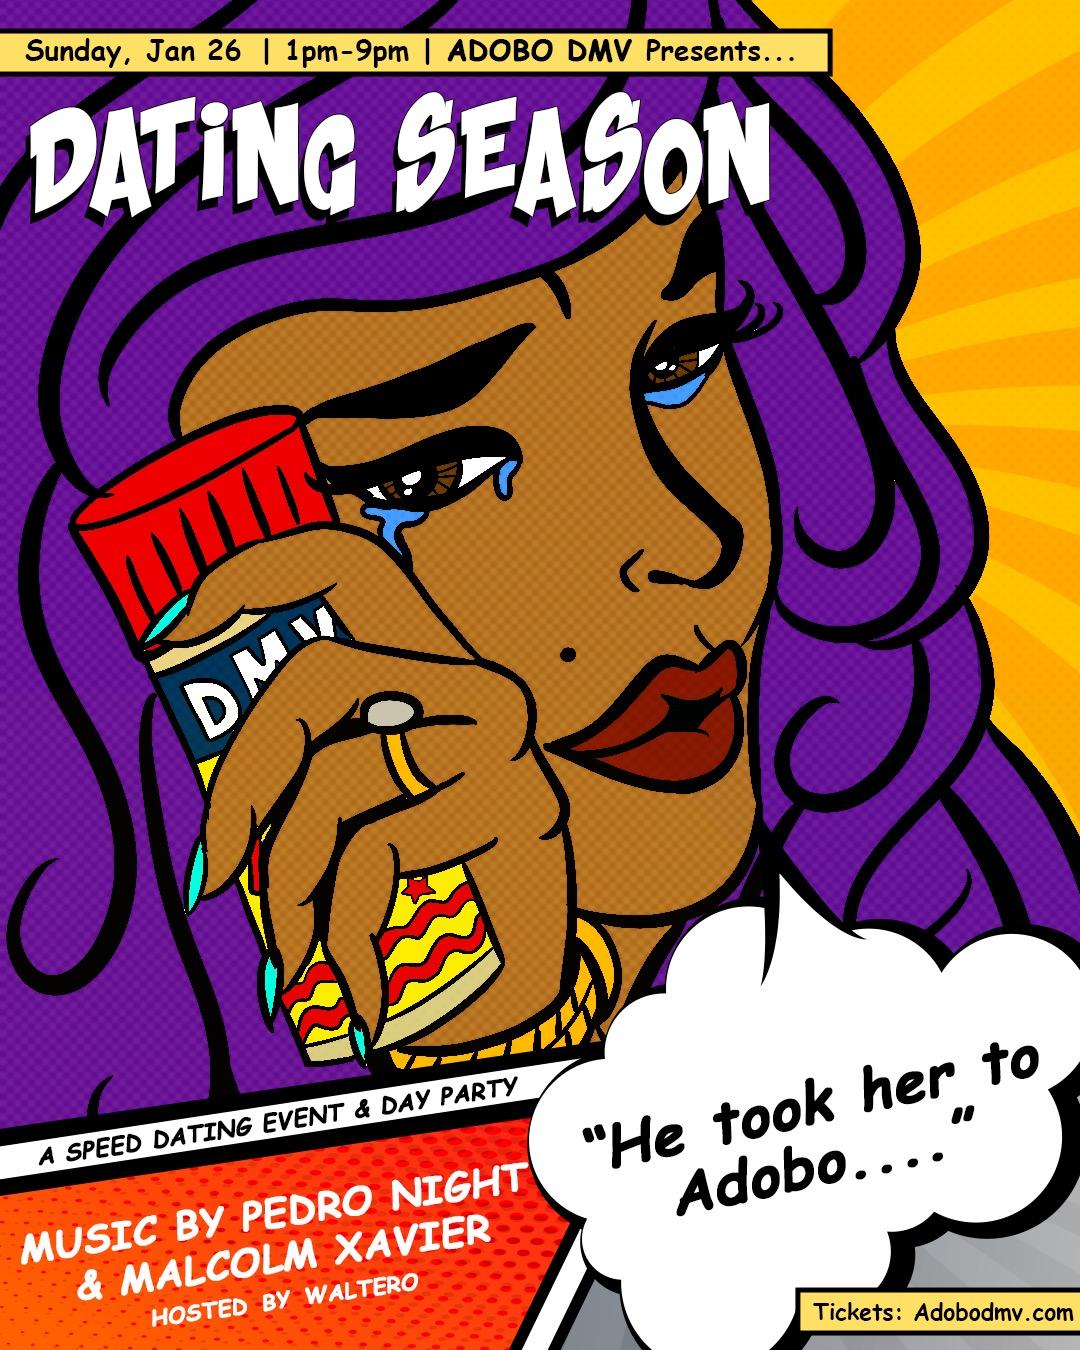 Dating Season • A Speed Dating Event + Day Party by ADOBO DMV